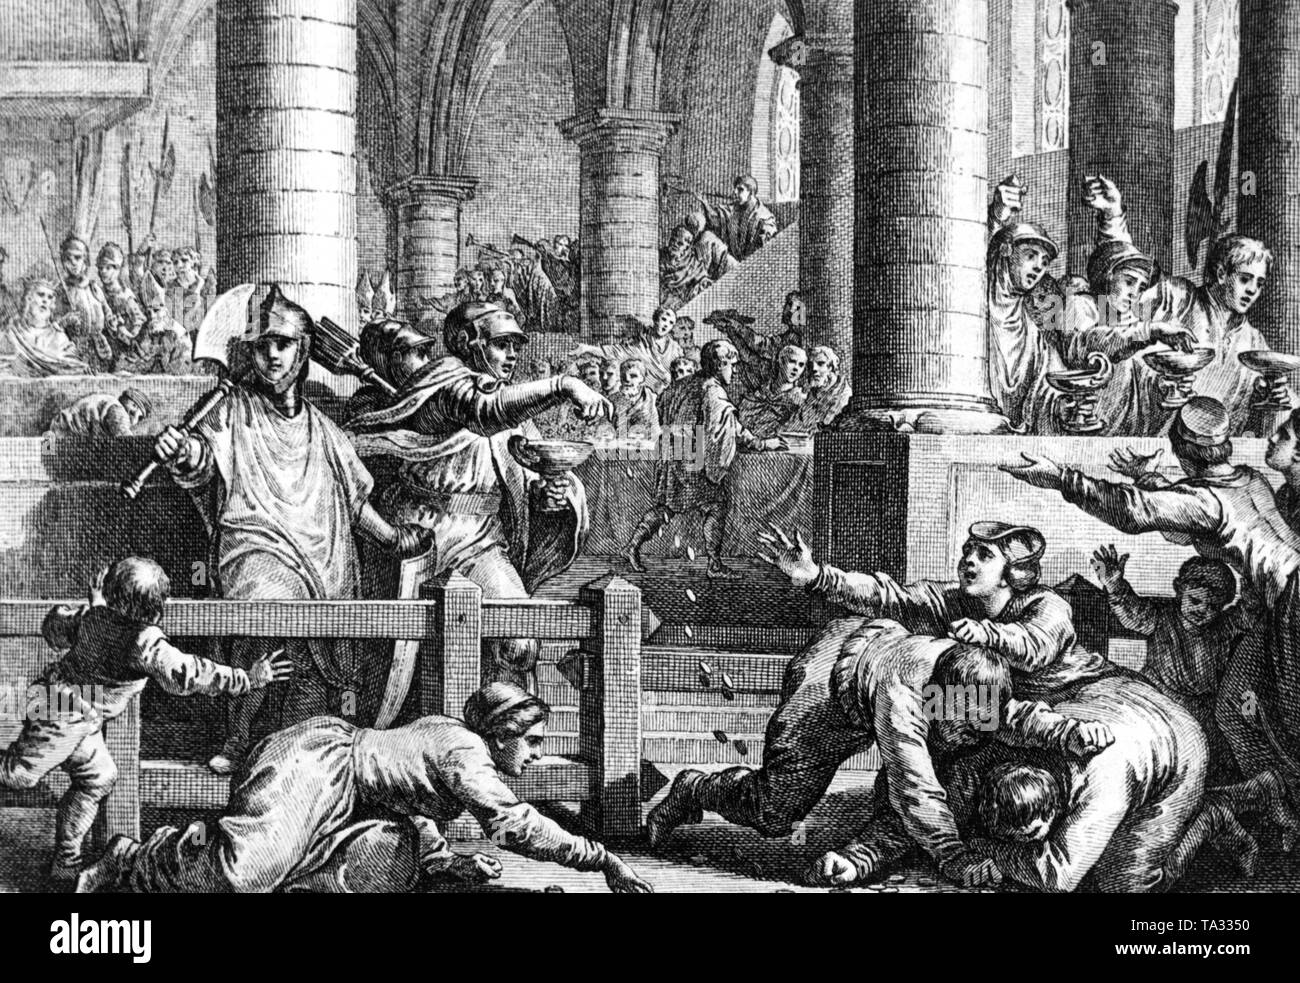 Court festival of the Frankish royal court under Pippin the Short, who was born around 715 AD and became king in 751 AD. King Pippin sits in the background on the left with the bishop and some followers. An engraving from Paris made around 1780 in the workshop of Jacques-Philippe Le Bas. Stock Photo